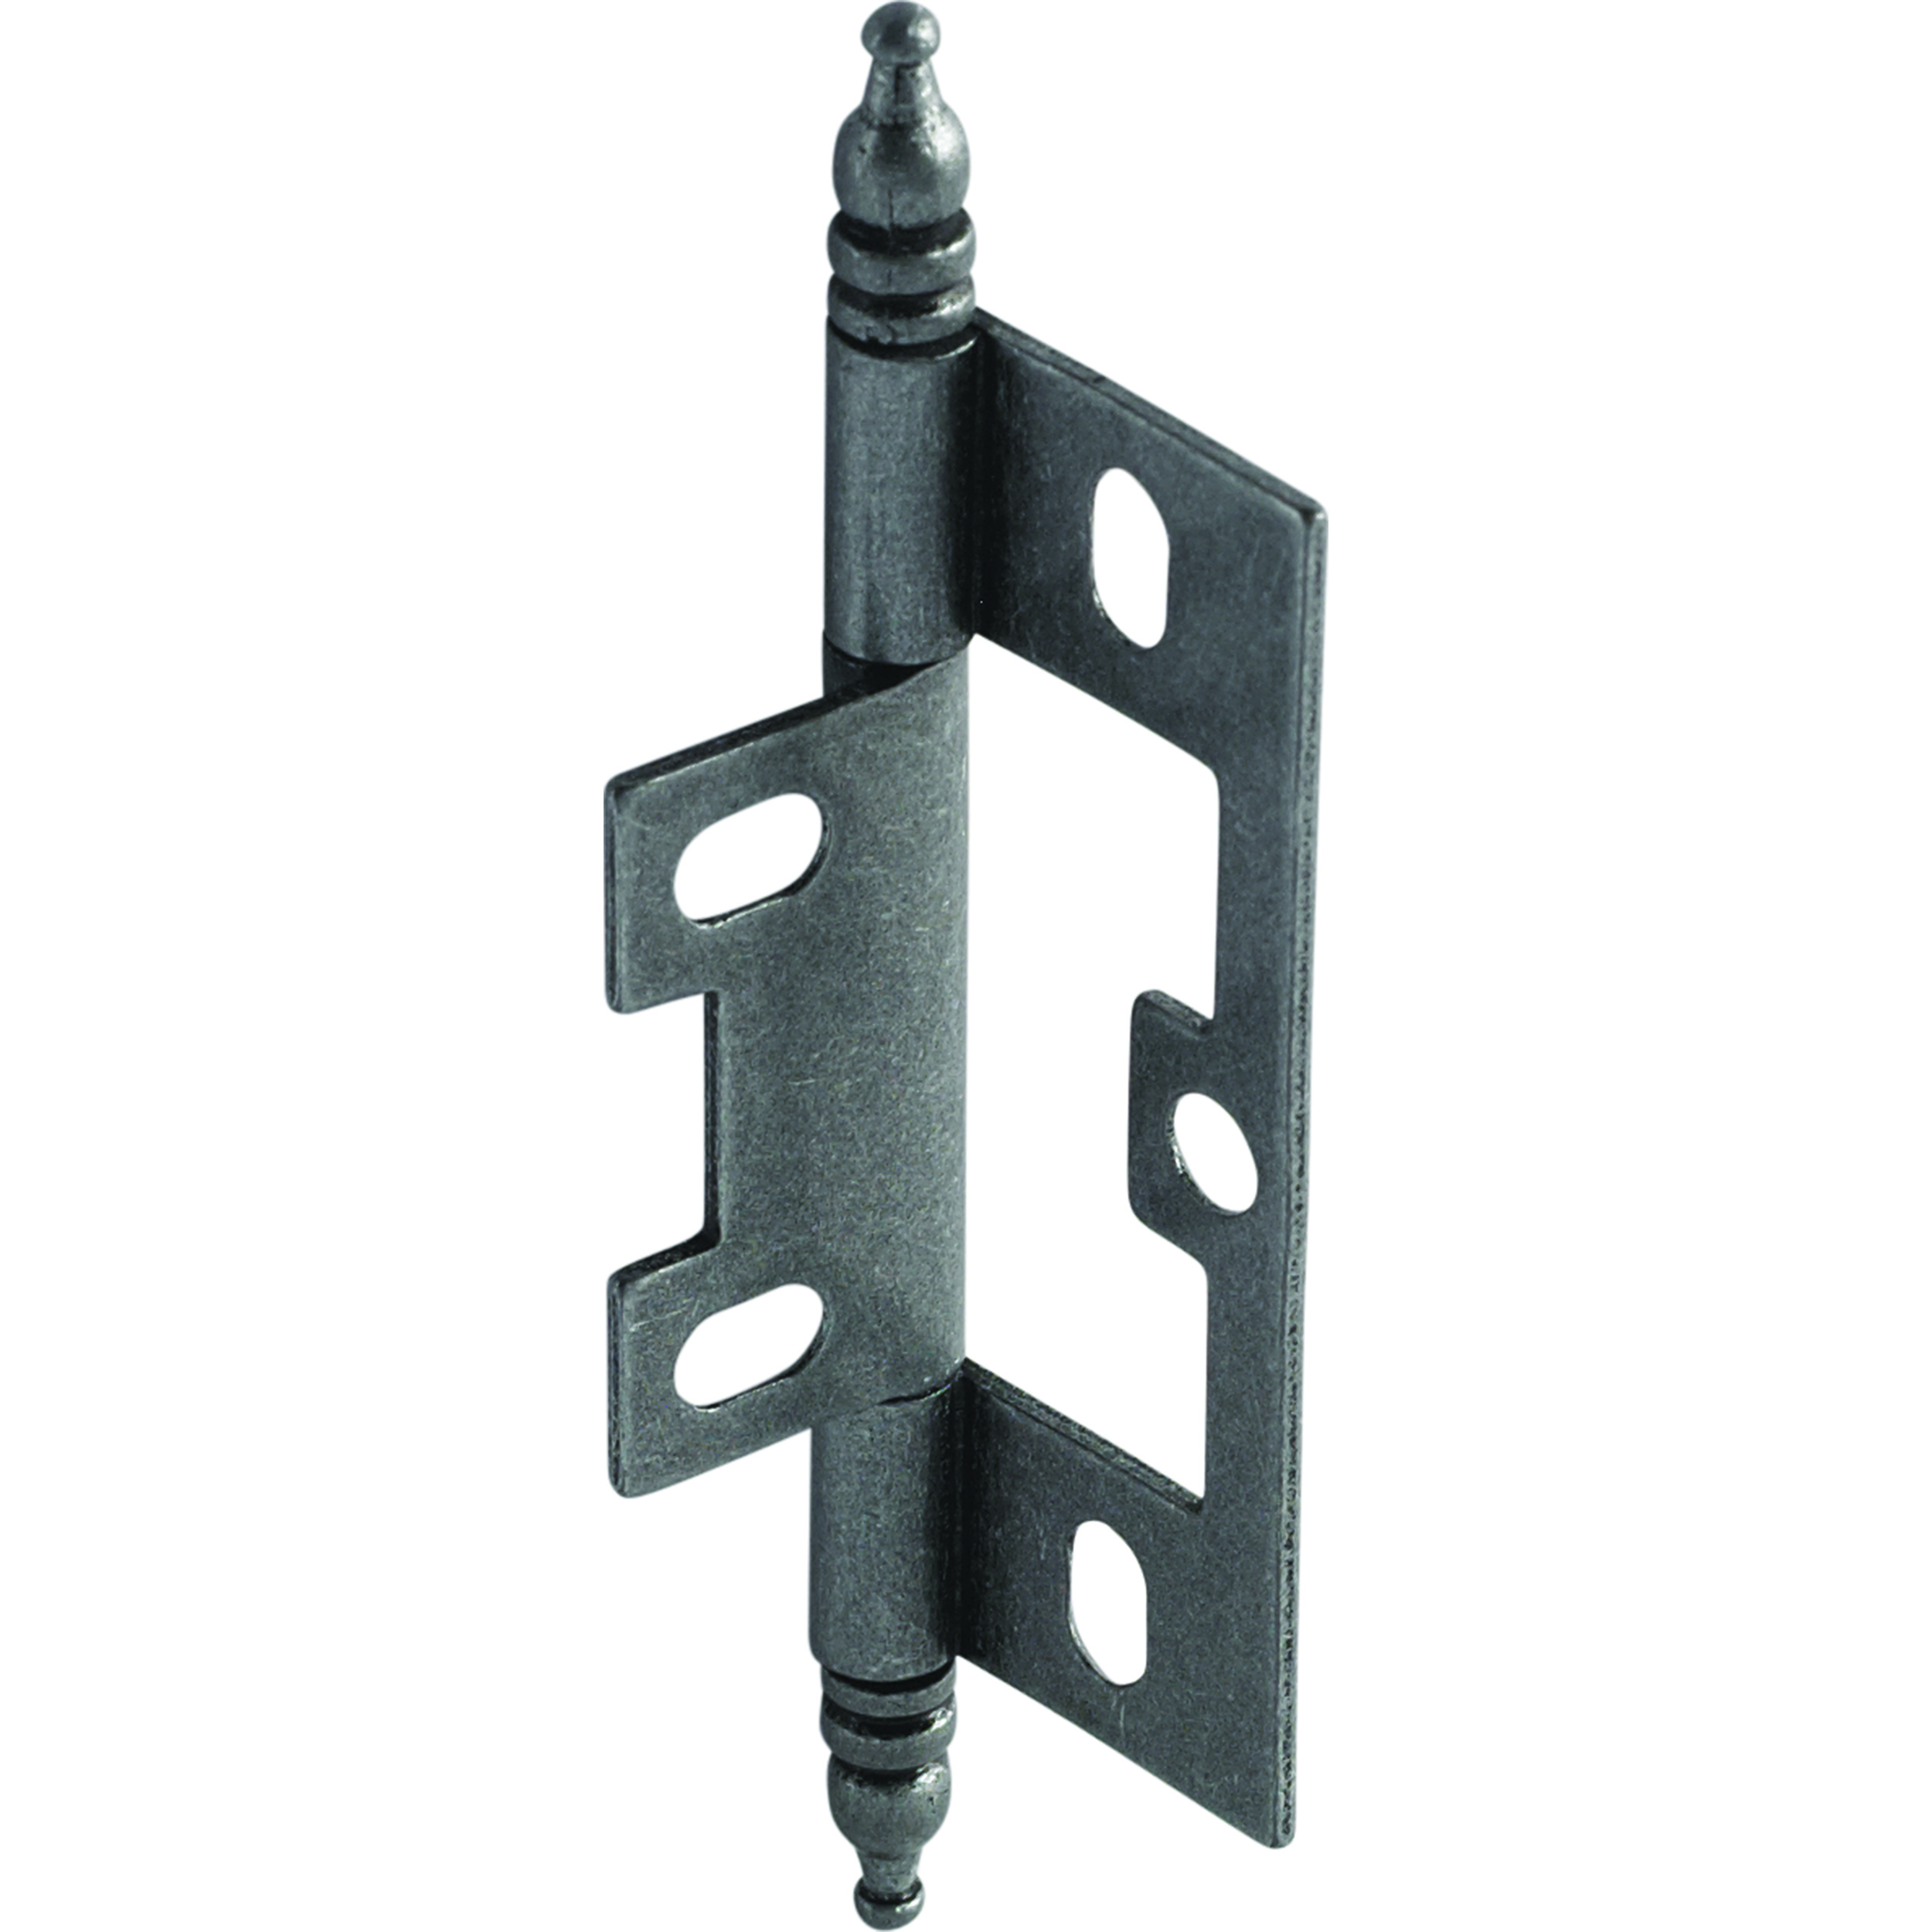 Non-mortised Decorative Butt Hinge With Finial In Pewter - Model# 351.95.670